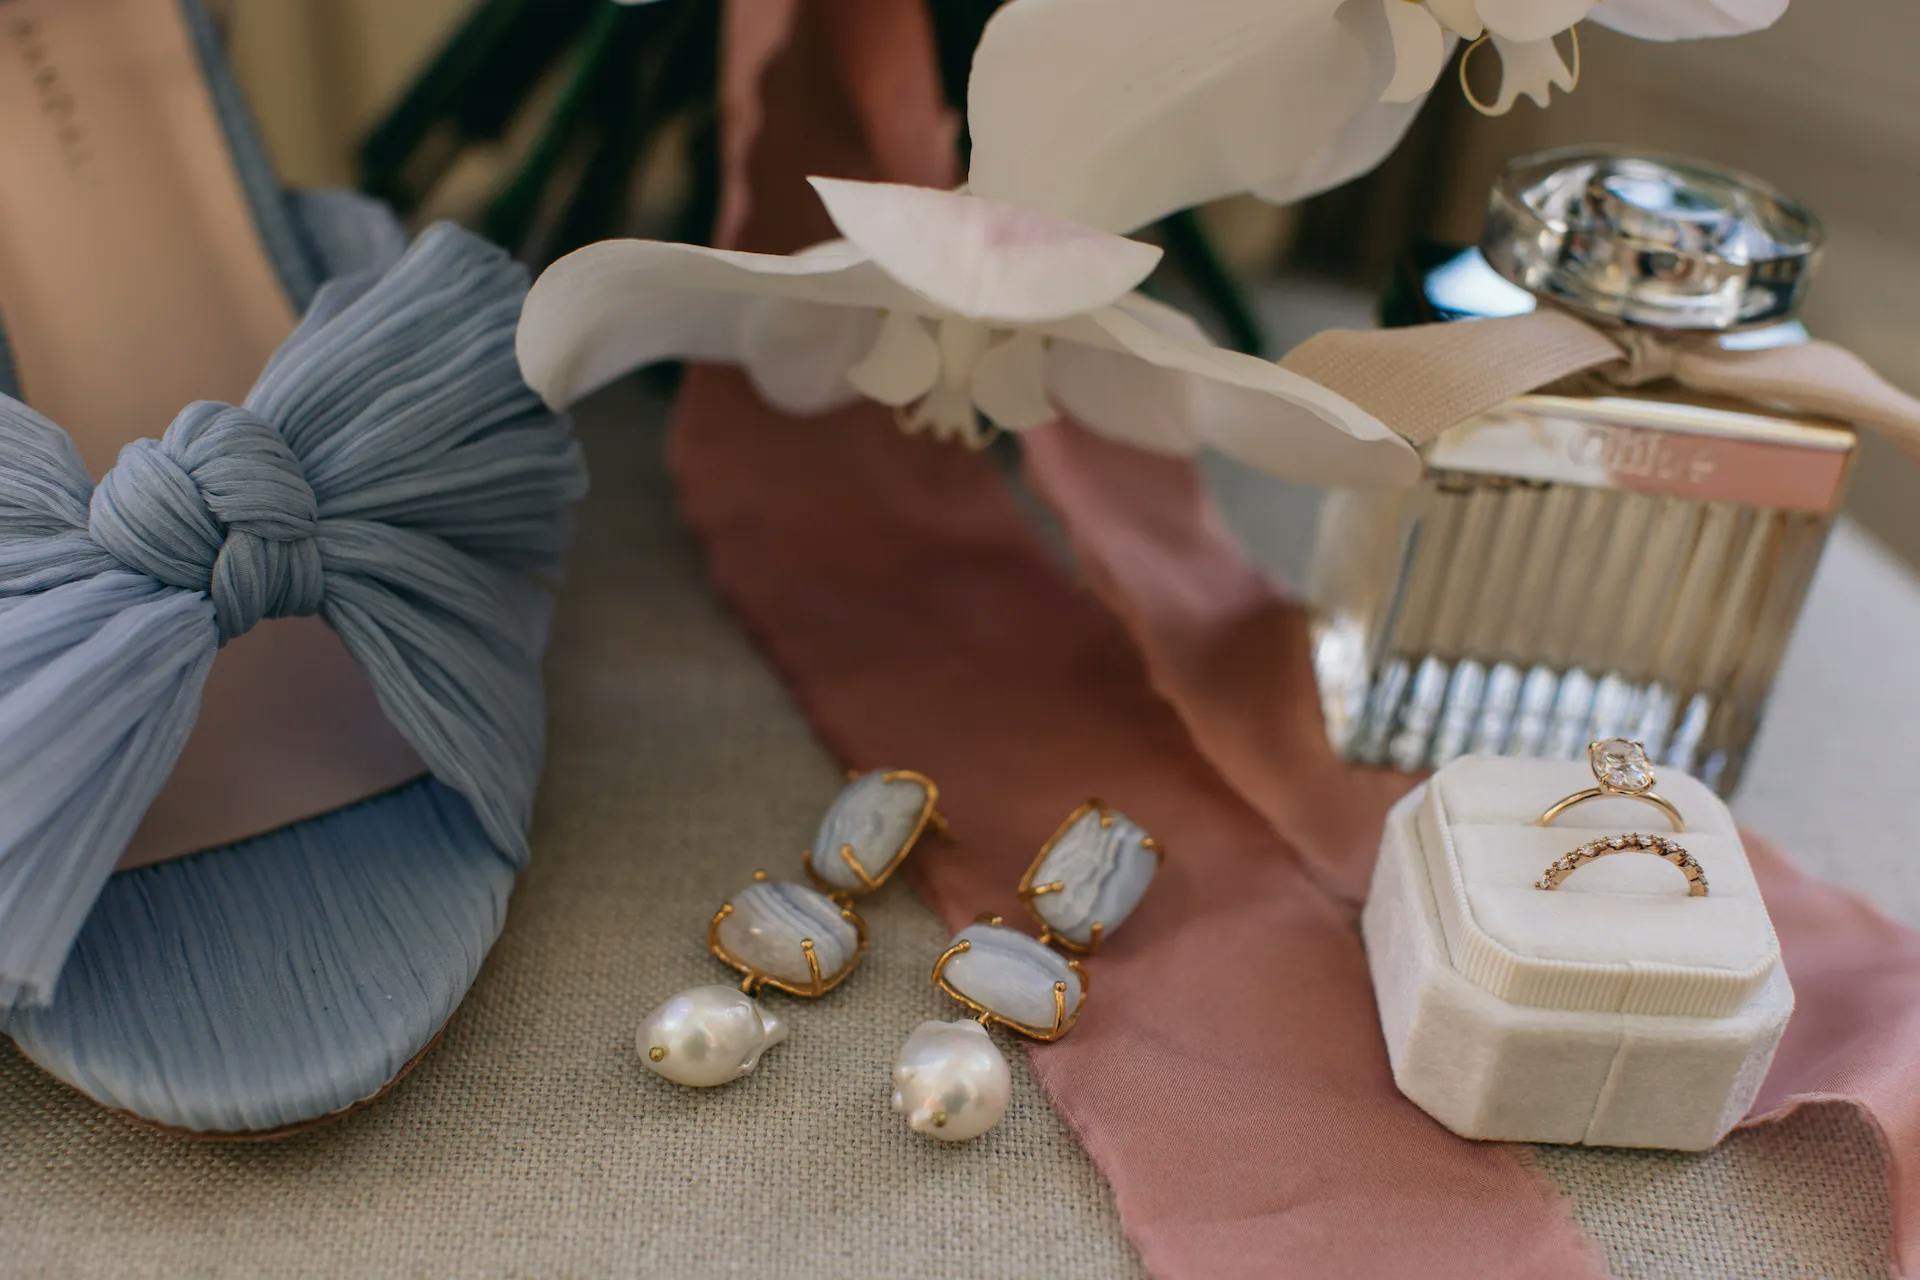 A close-up of wedding accessories includes a blue shoe with a bow, a pair of gemstone and pearl earrings, a white ring box containing two rings, and a perfume bottle placed on a beige surface with a pink ribbon. White flowers are partially visible in the background.